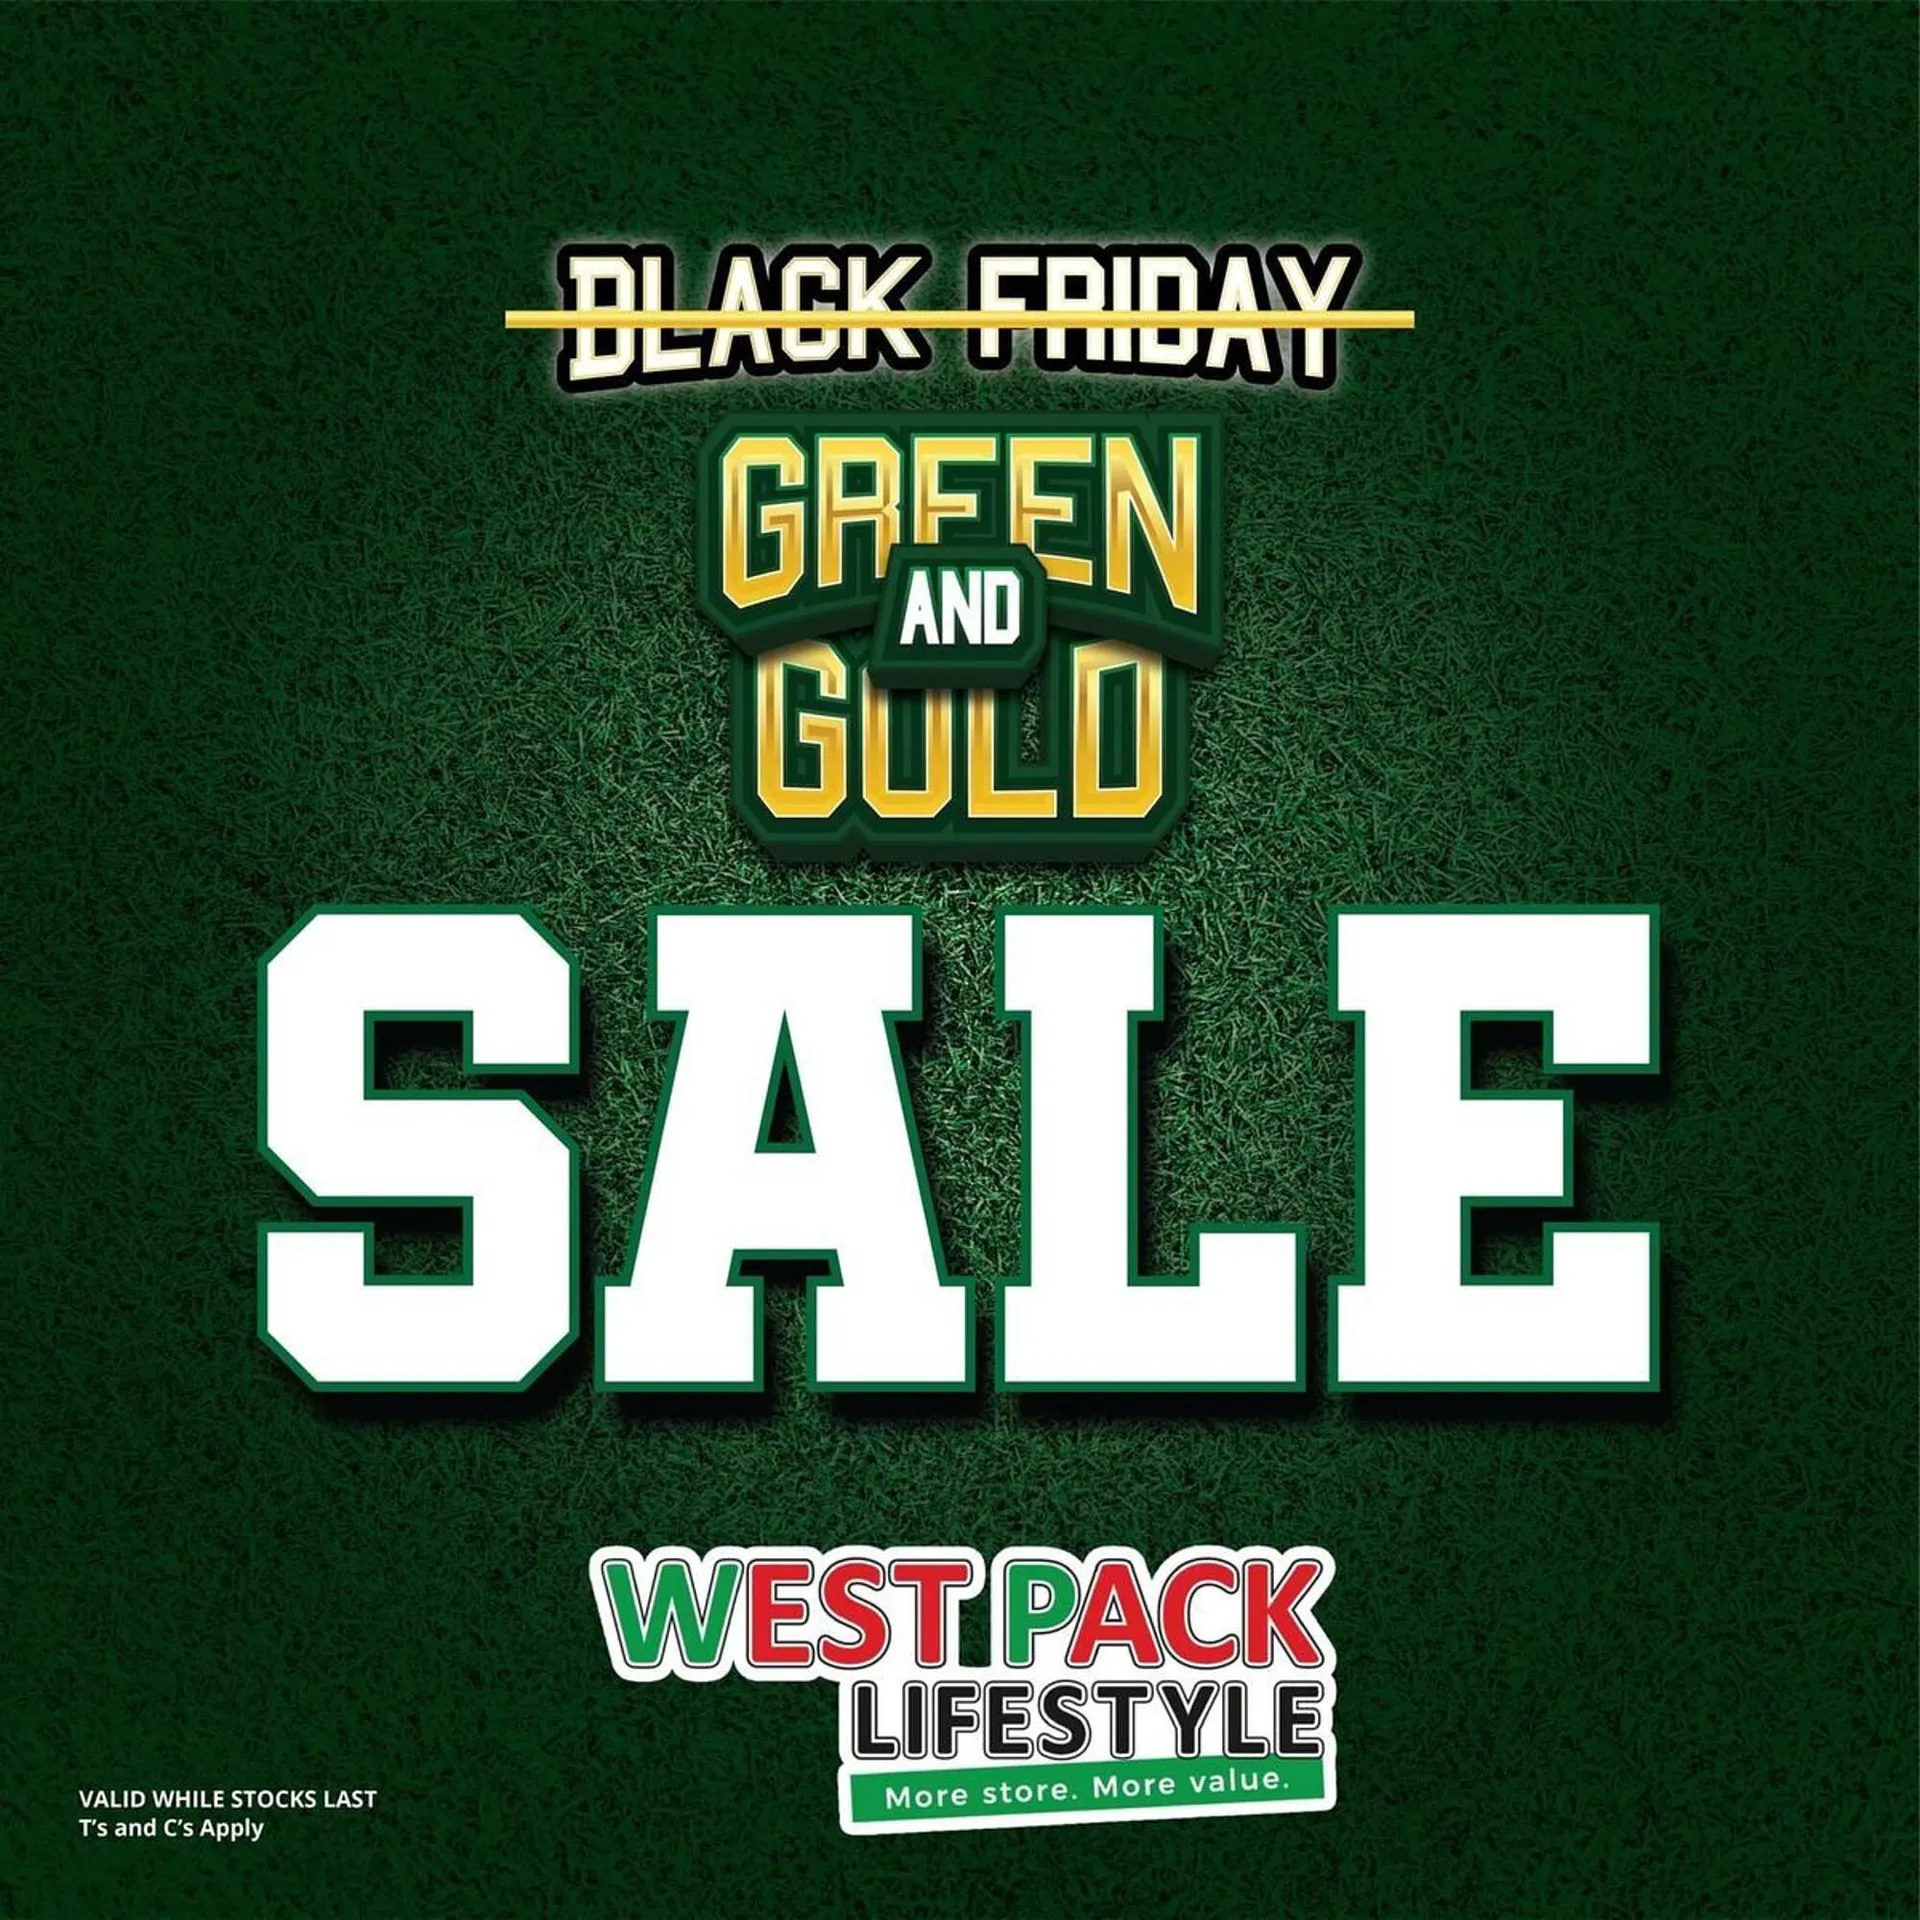 West Pack Lifestyle catalogue